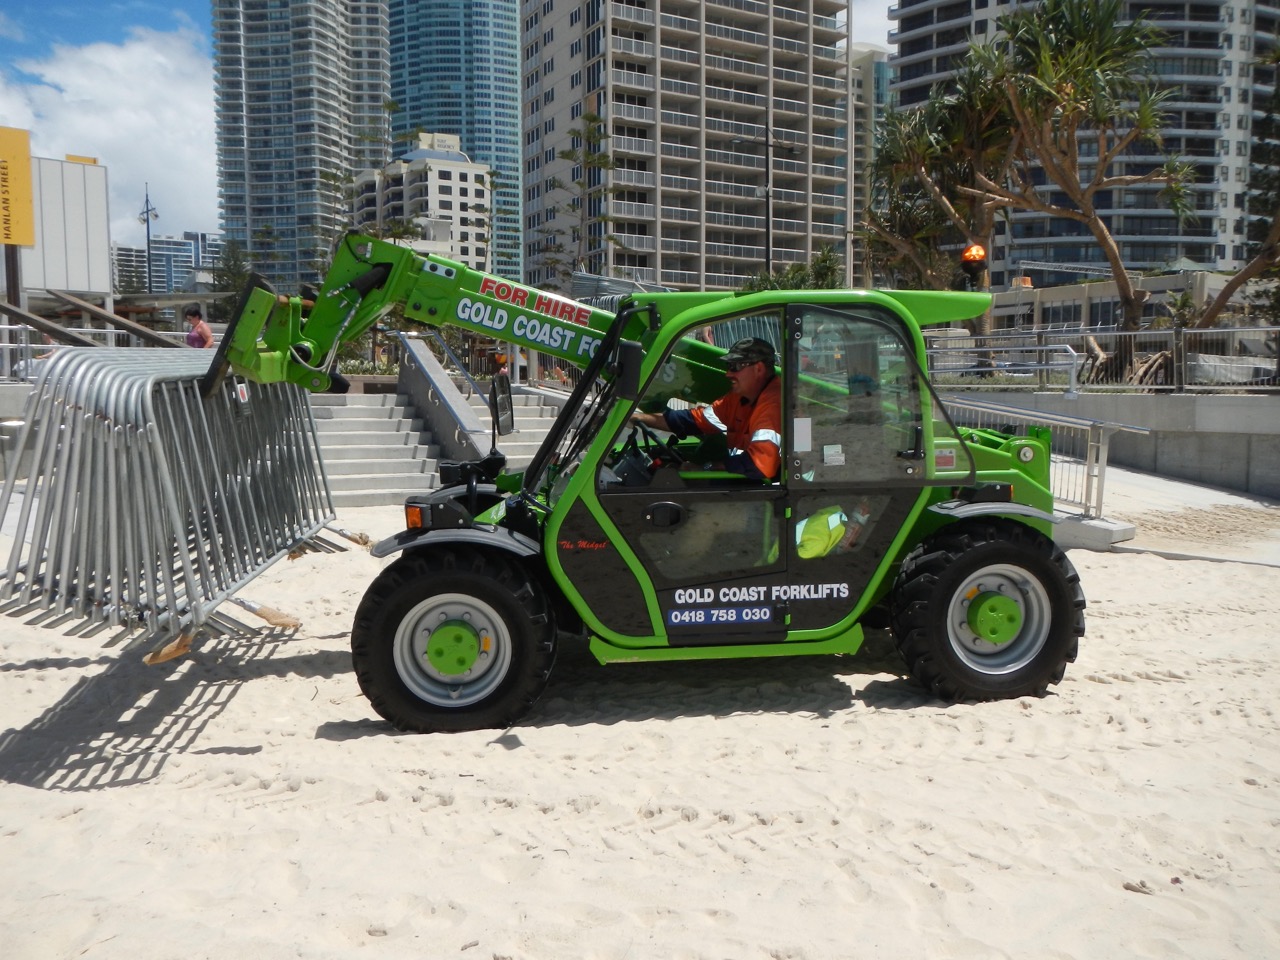 Down On The Beach Operator Service Surfers Paradise.